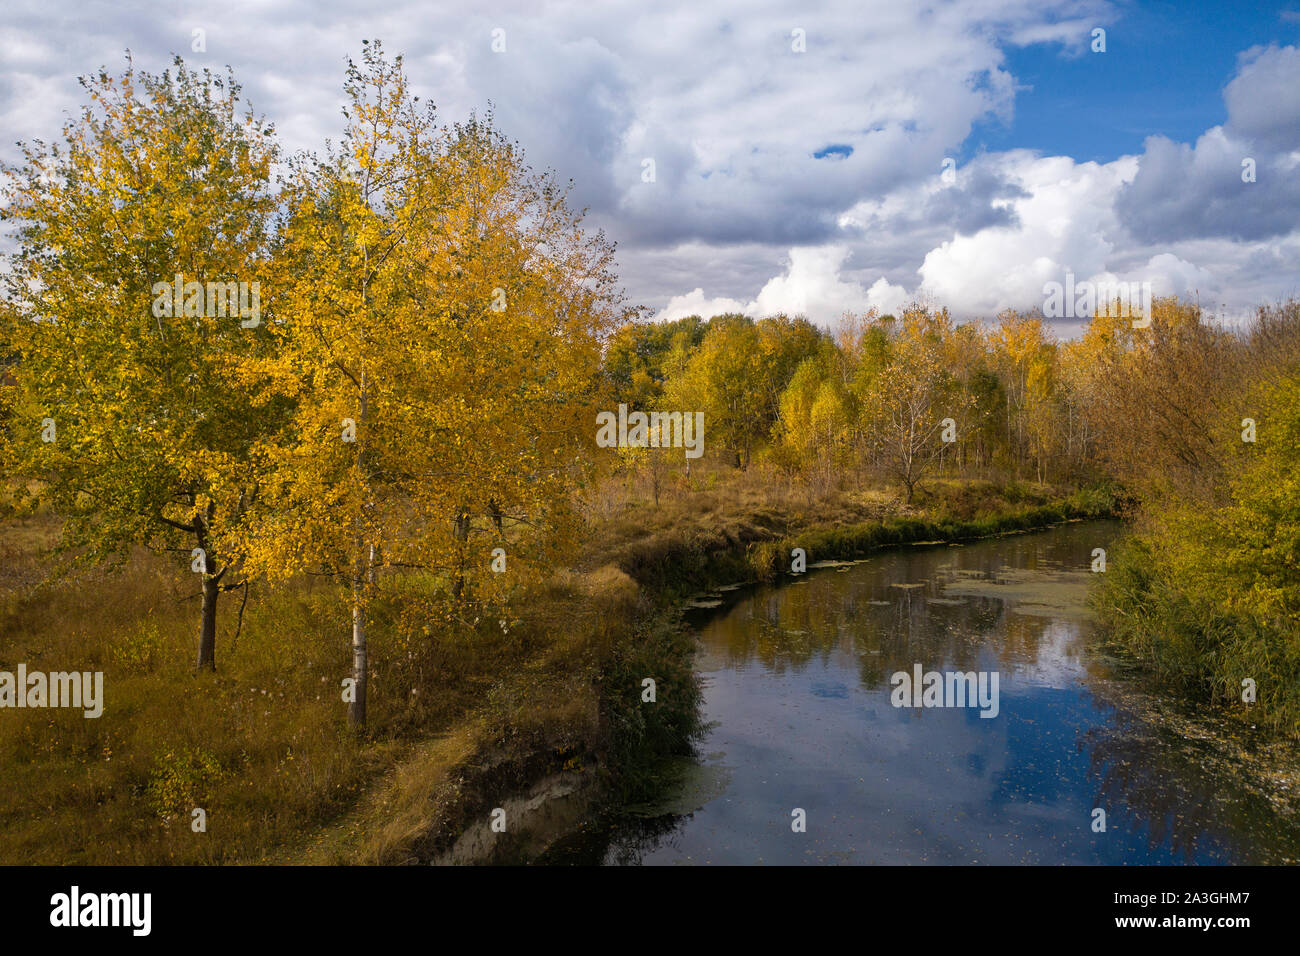 aerial view of autumn river with yellow trees Stock Photo